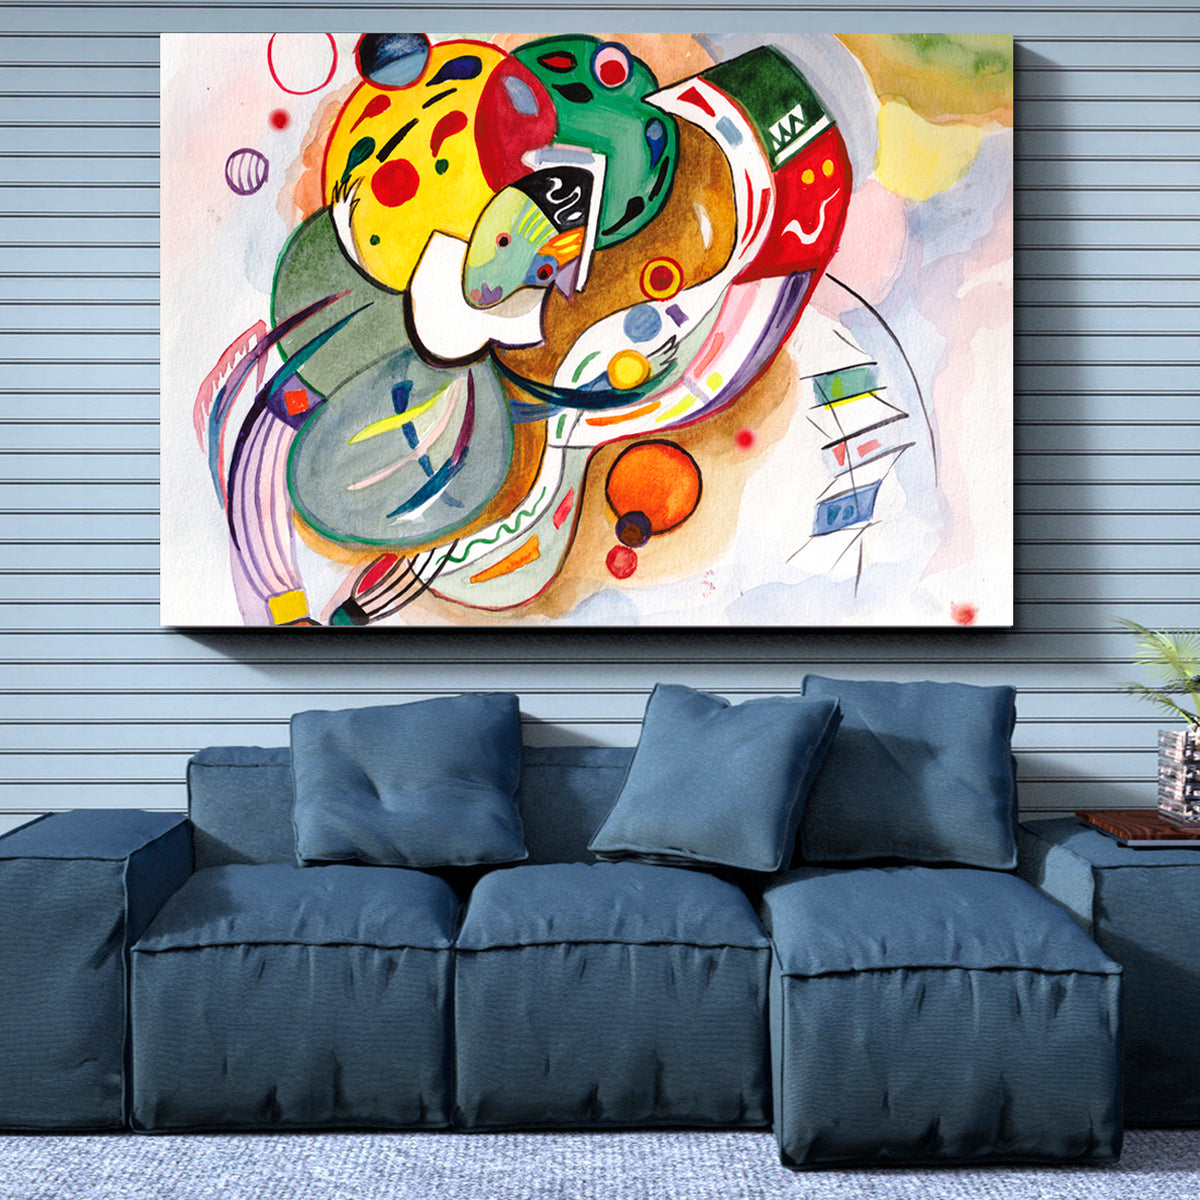 CLOWN Inspired By Kandinsky Trendy Abstract Figurative Contemporary Art Artesty 1 panel 24" x 16" 